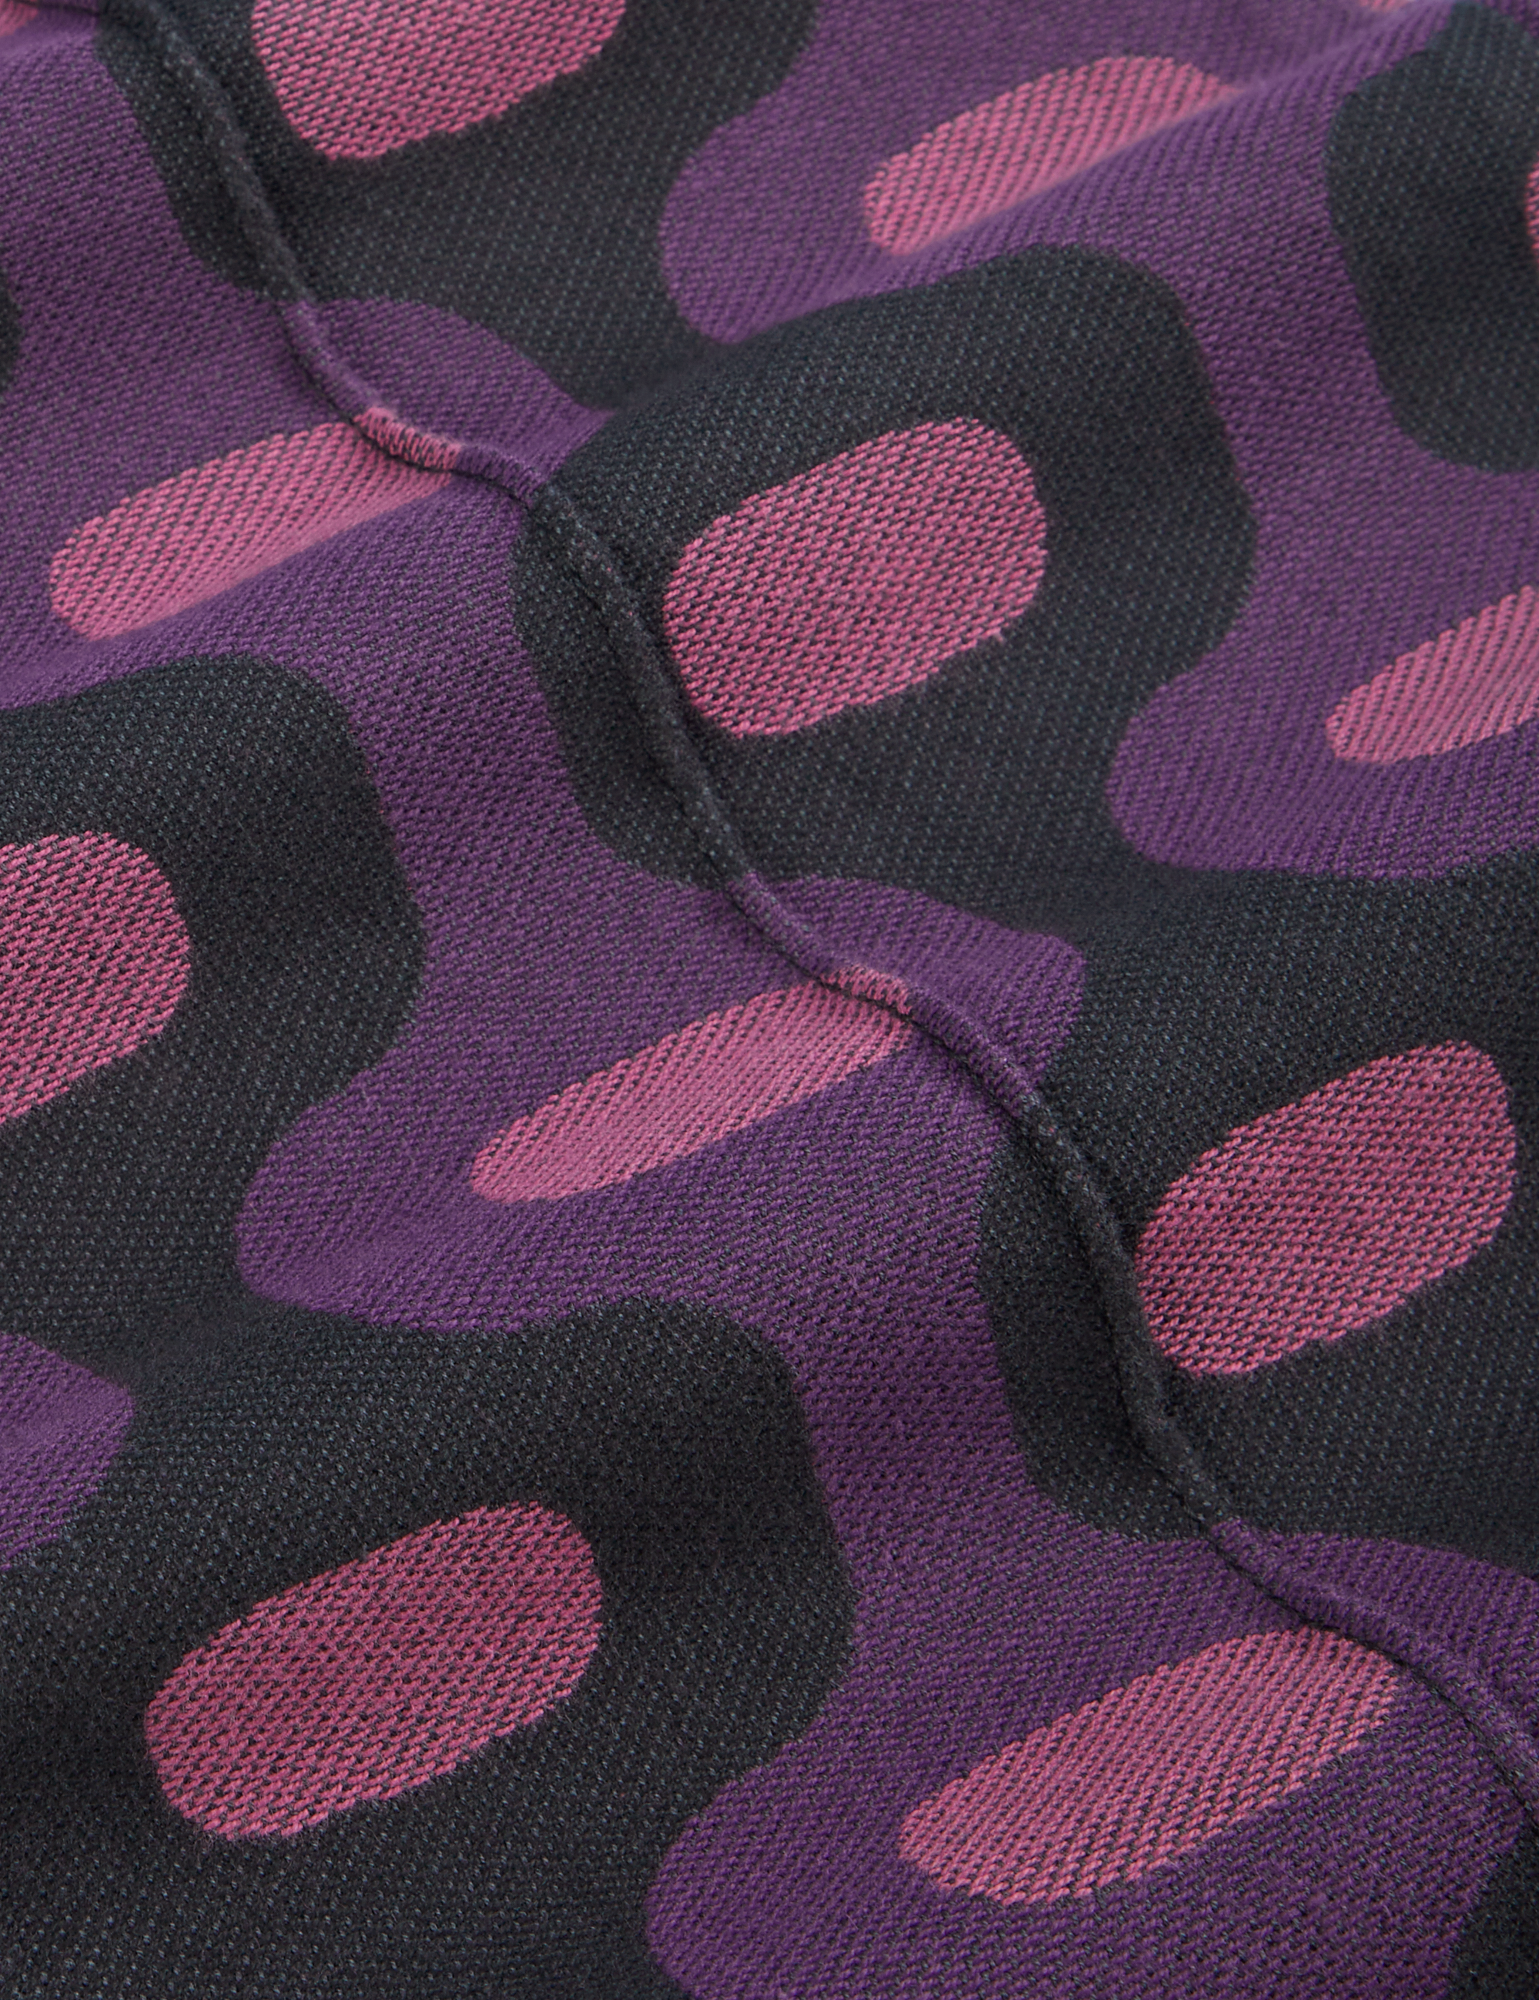 Western Pants in Purple Tile Jacquard fabric detail close up